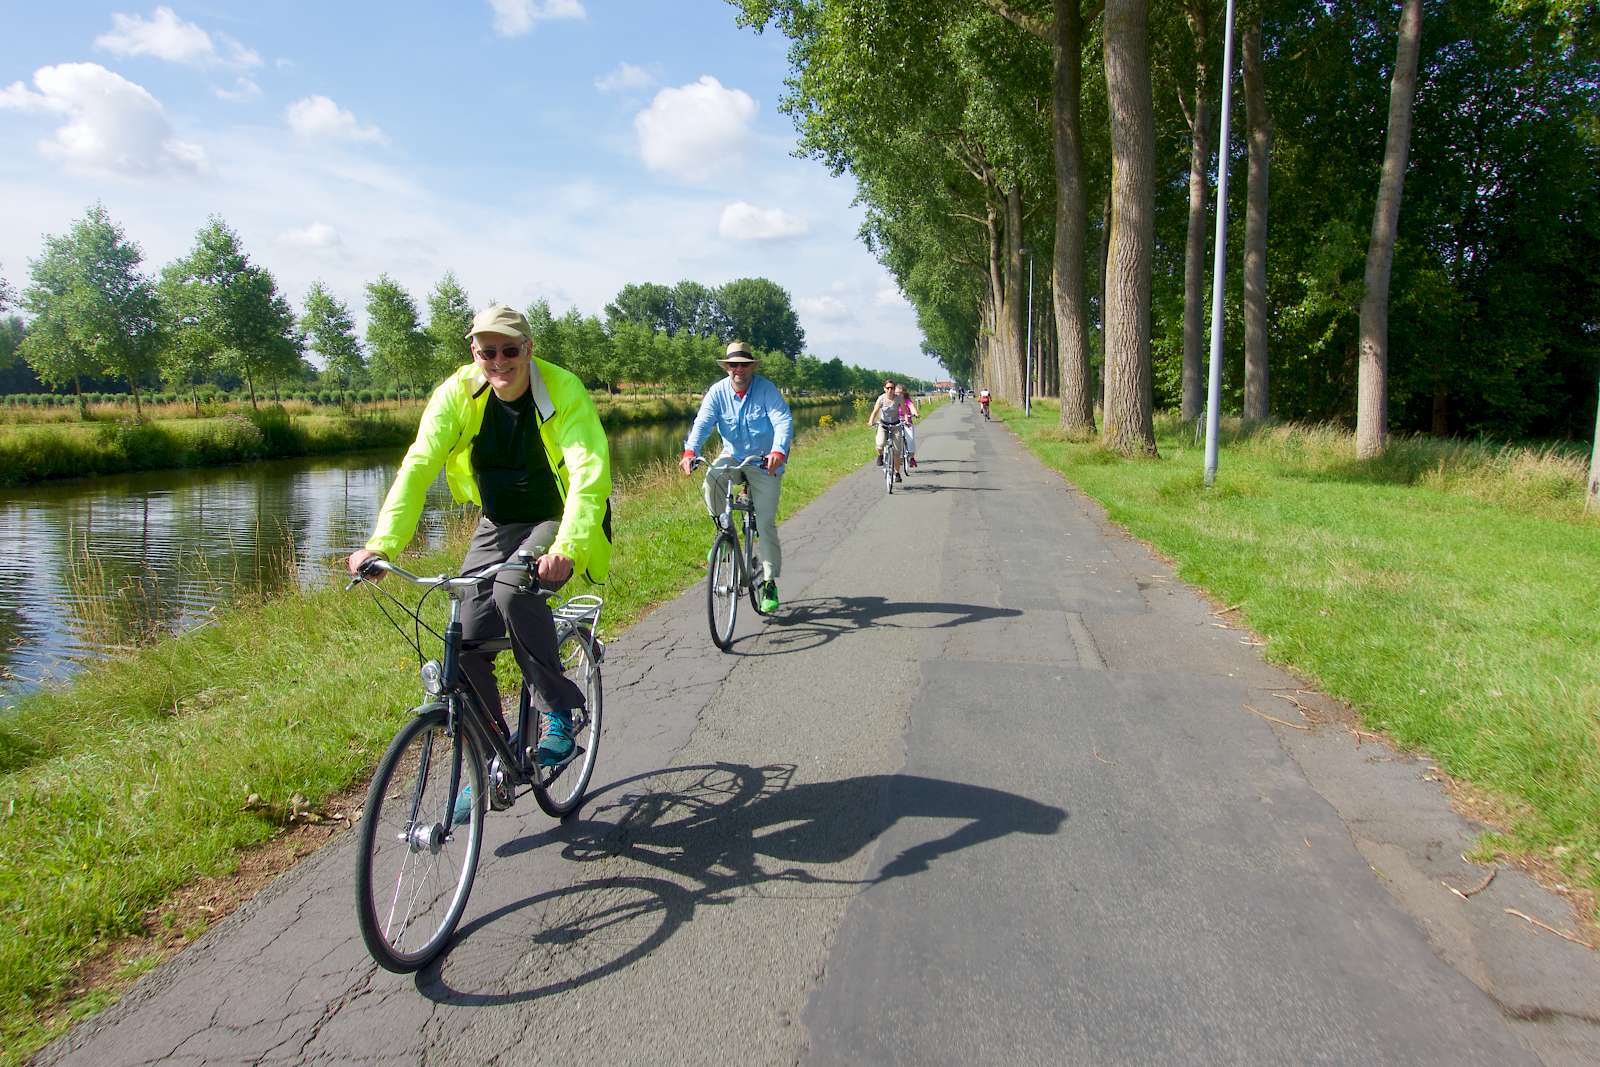 Fun, Built-in Fitness While Sightseeing Bike path Amsterdam